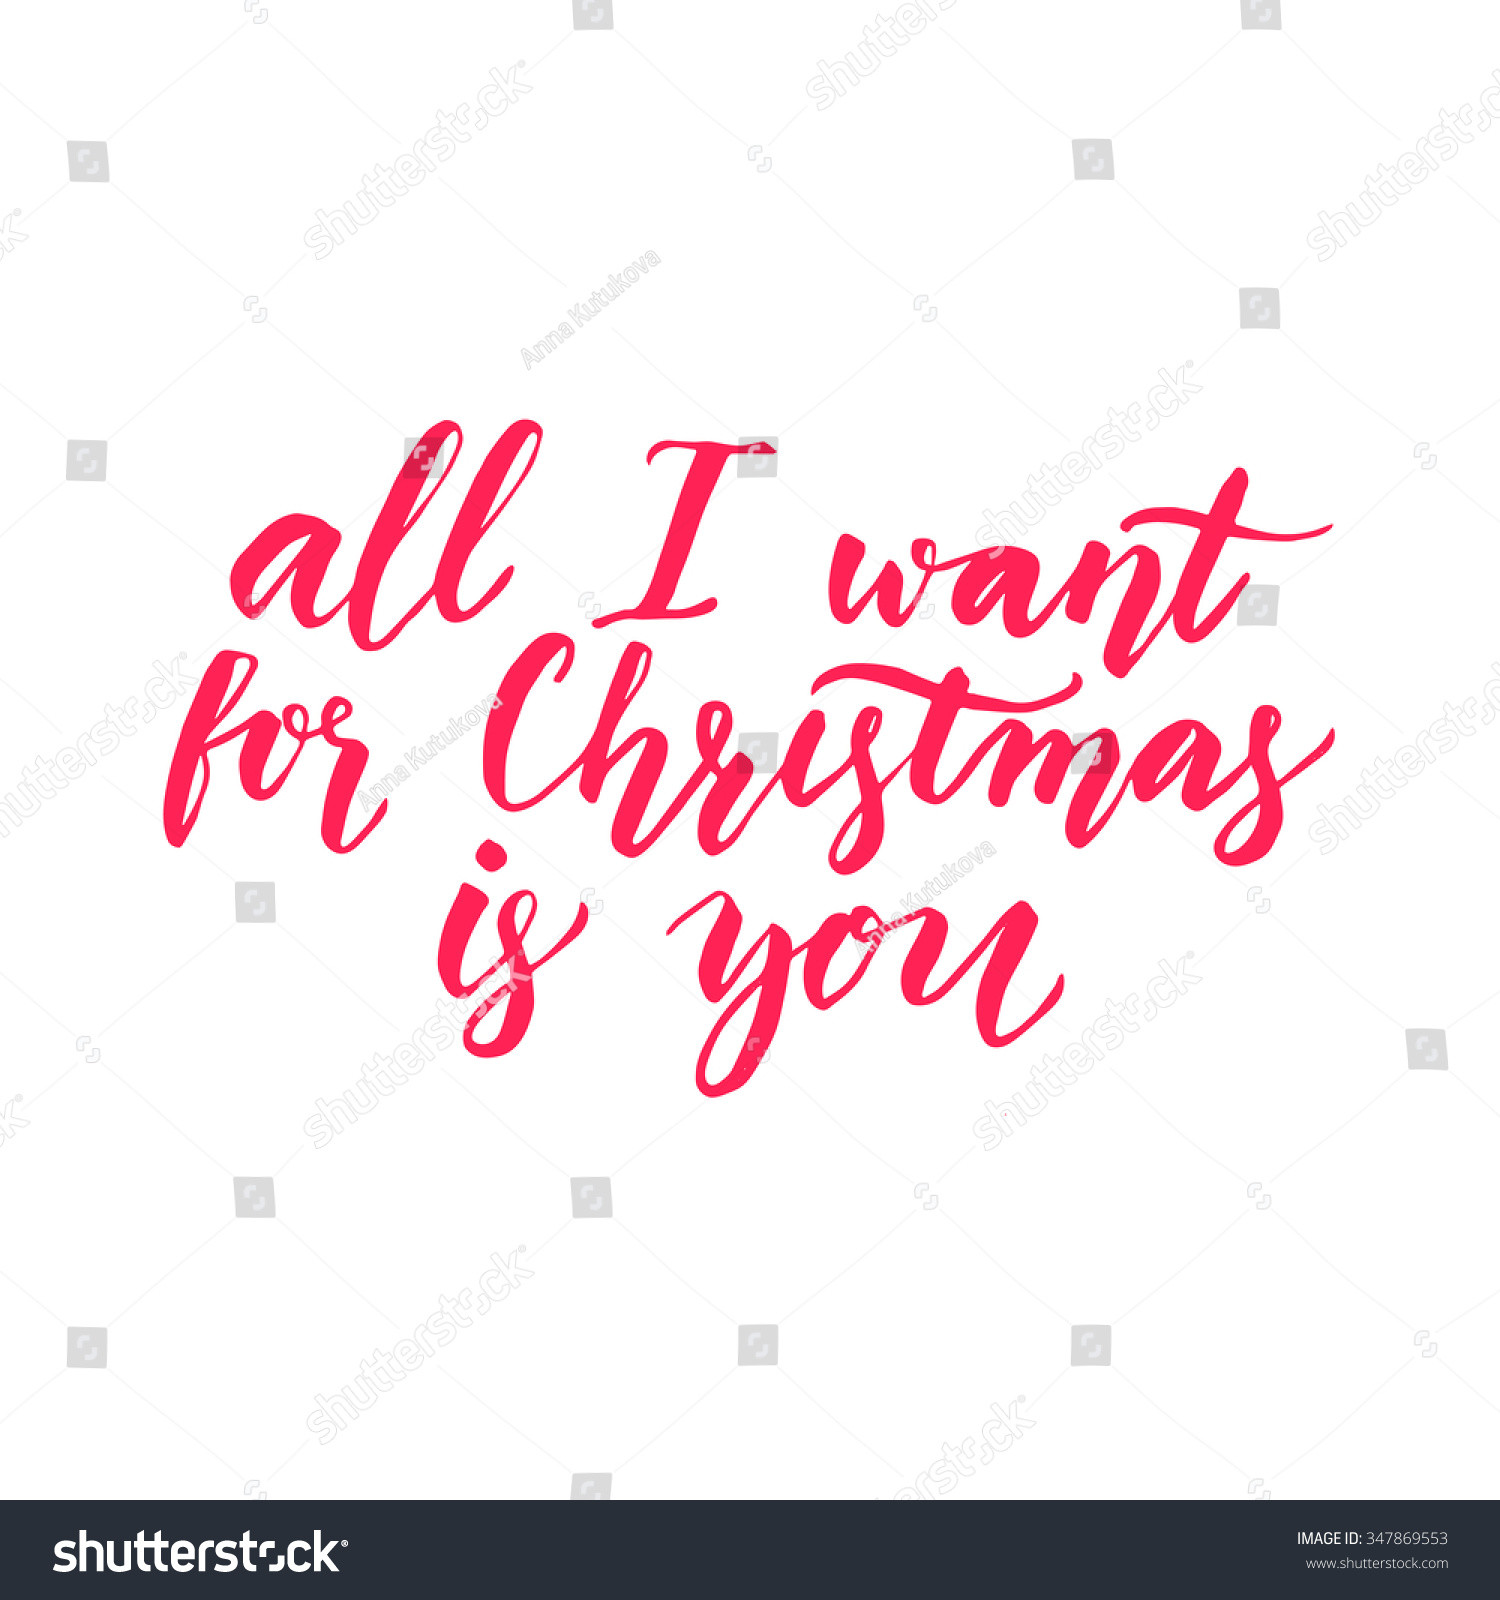 All I Want For Christmas Quotes
 All Want Christmas You Inspirational Quote Stock Vector